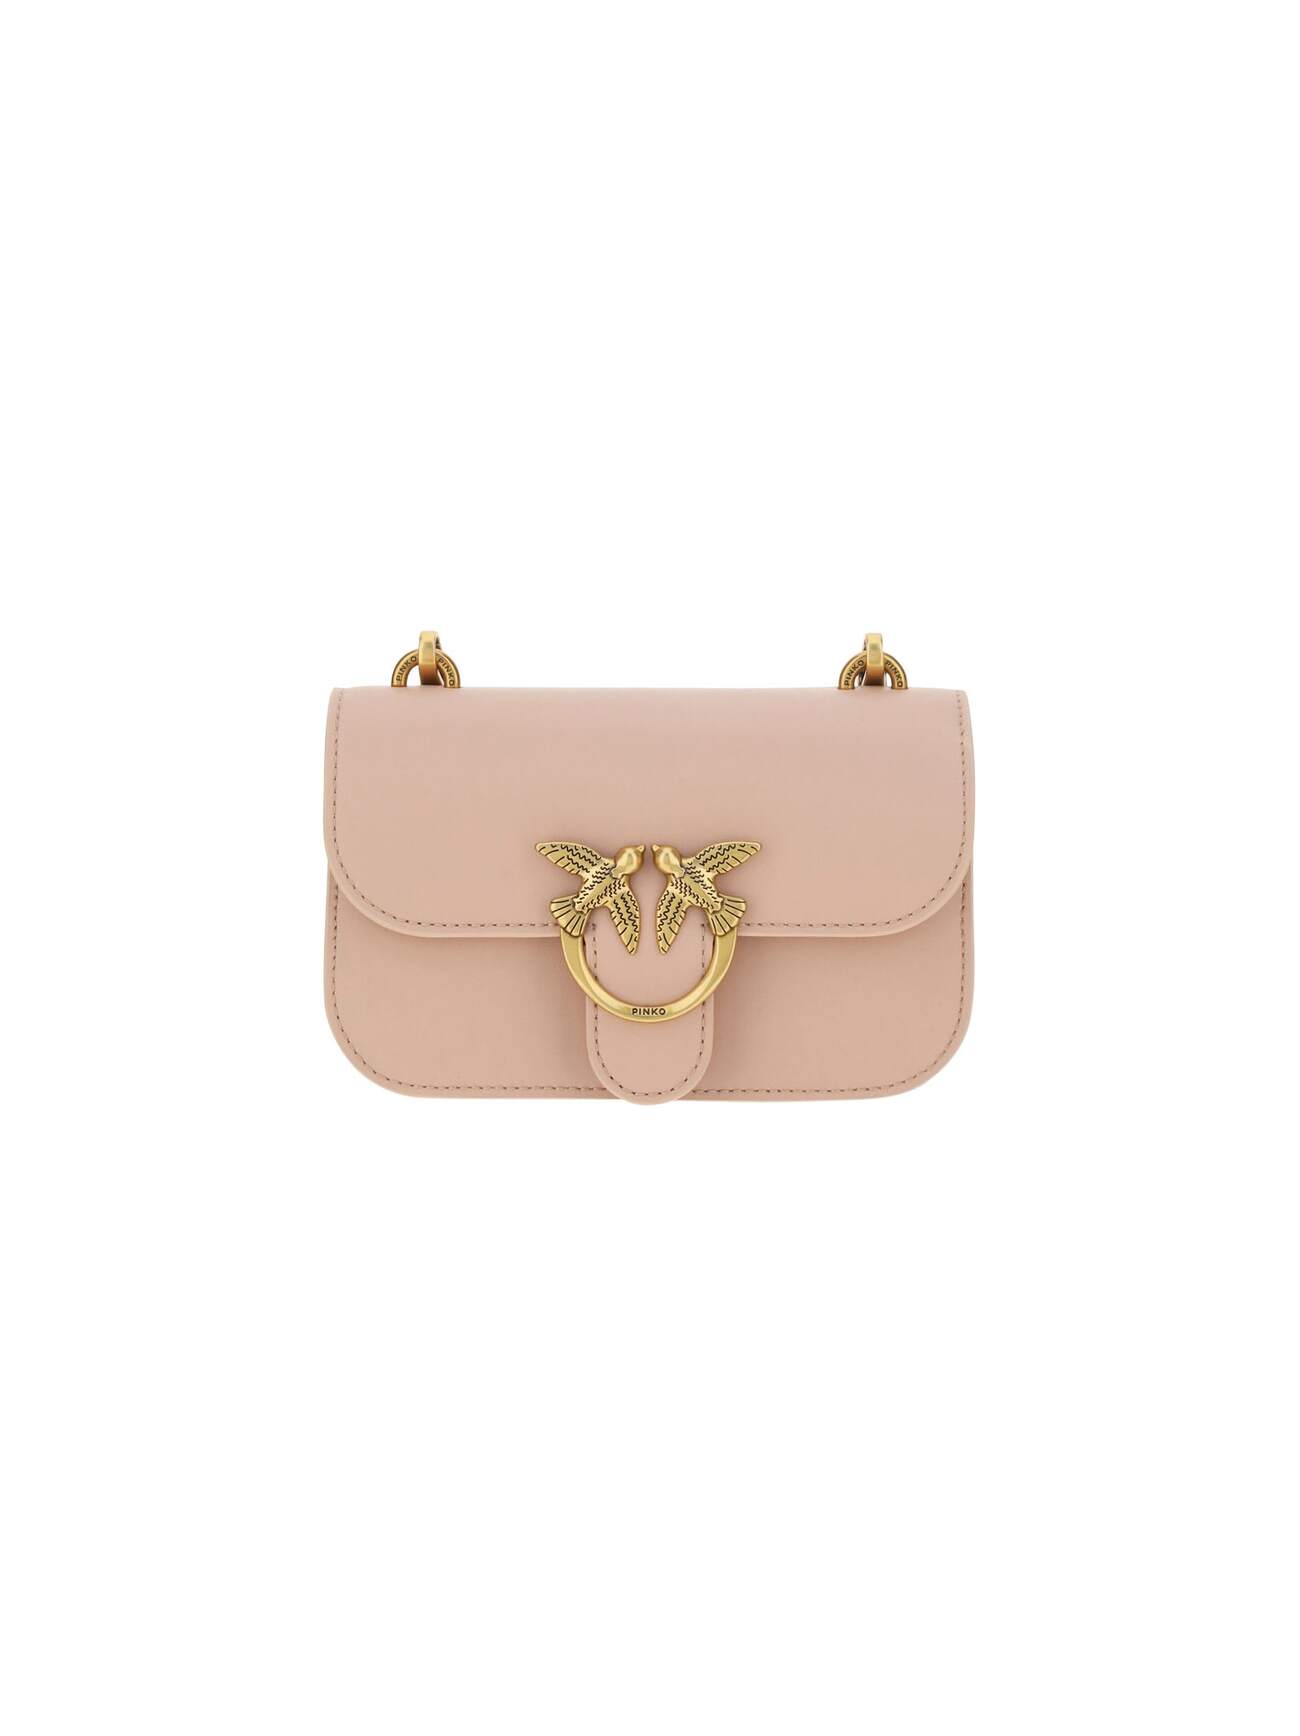 Pinko Love Baby Bell Bag in pink